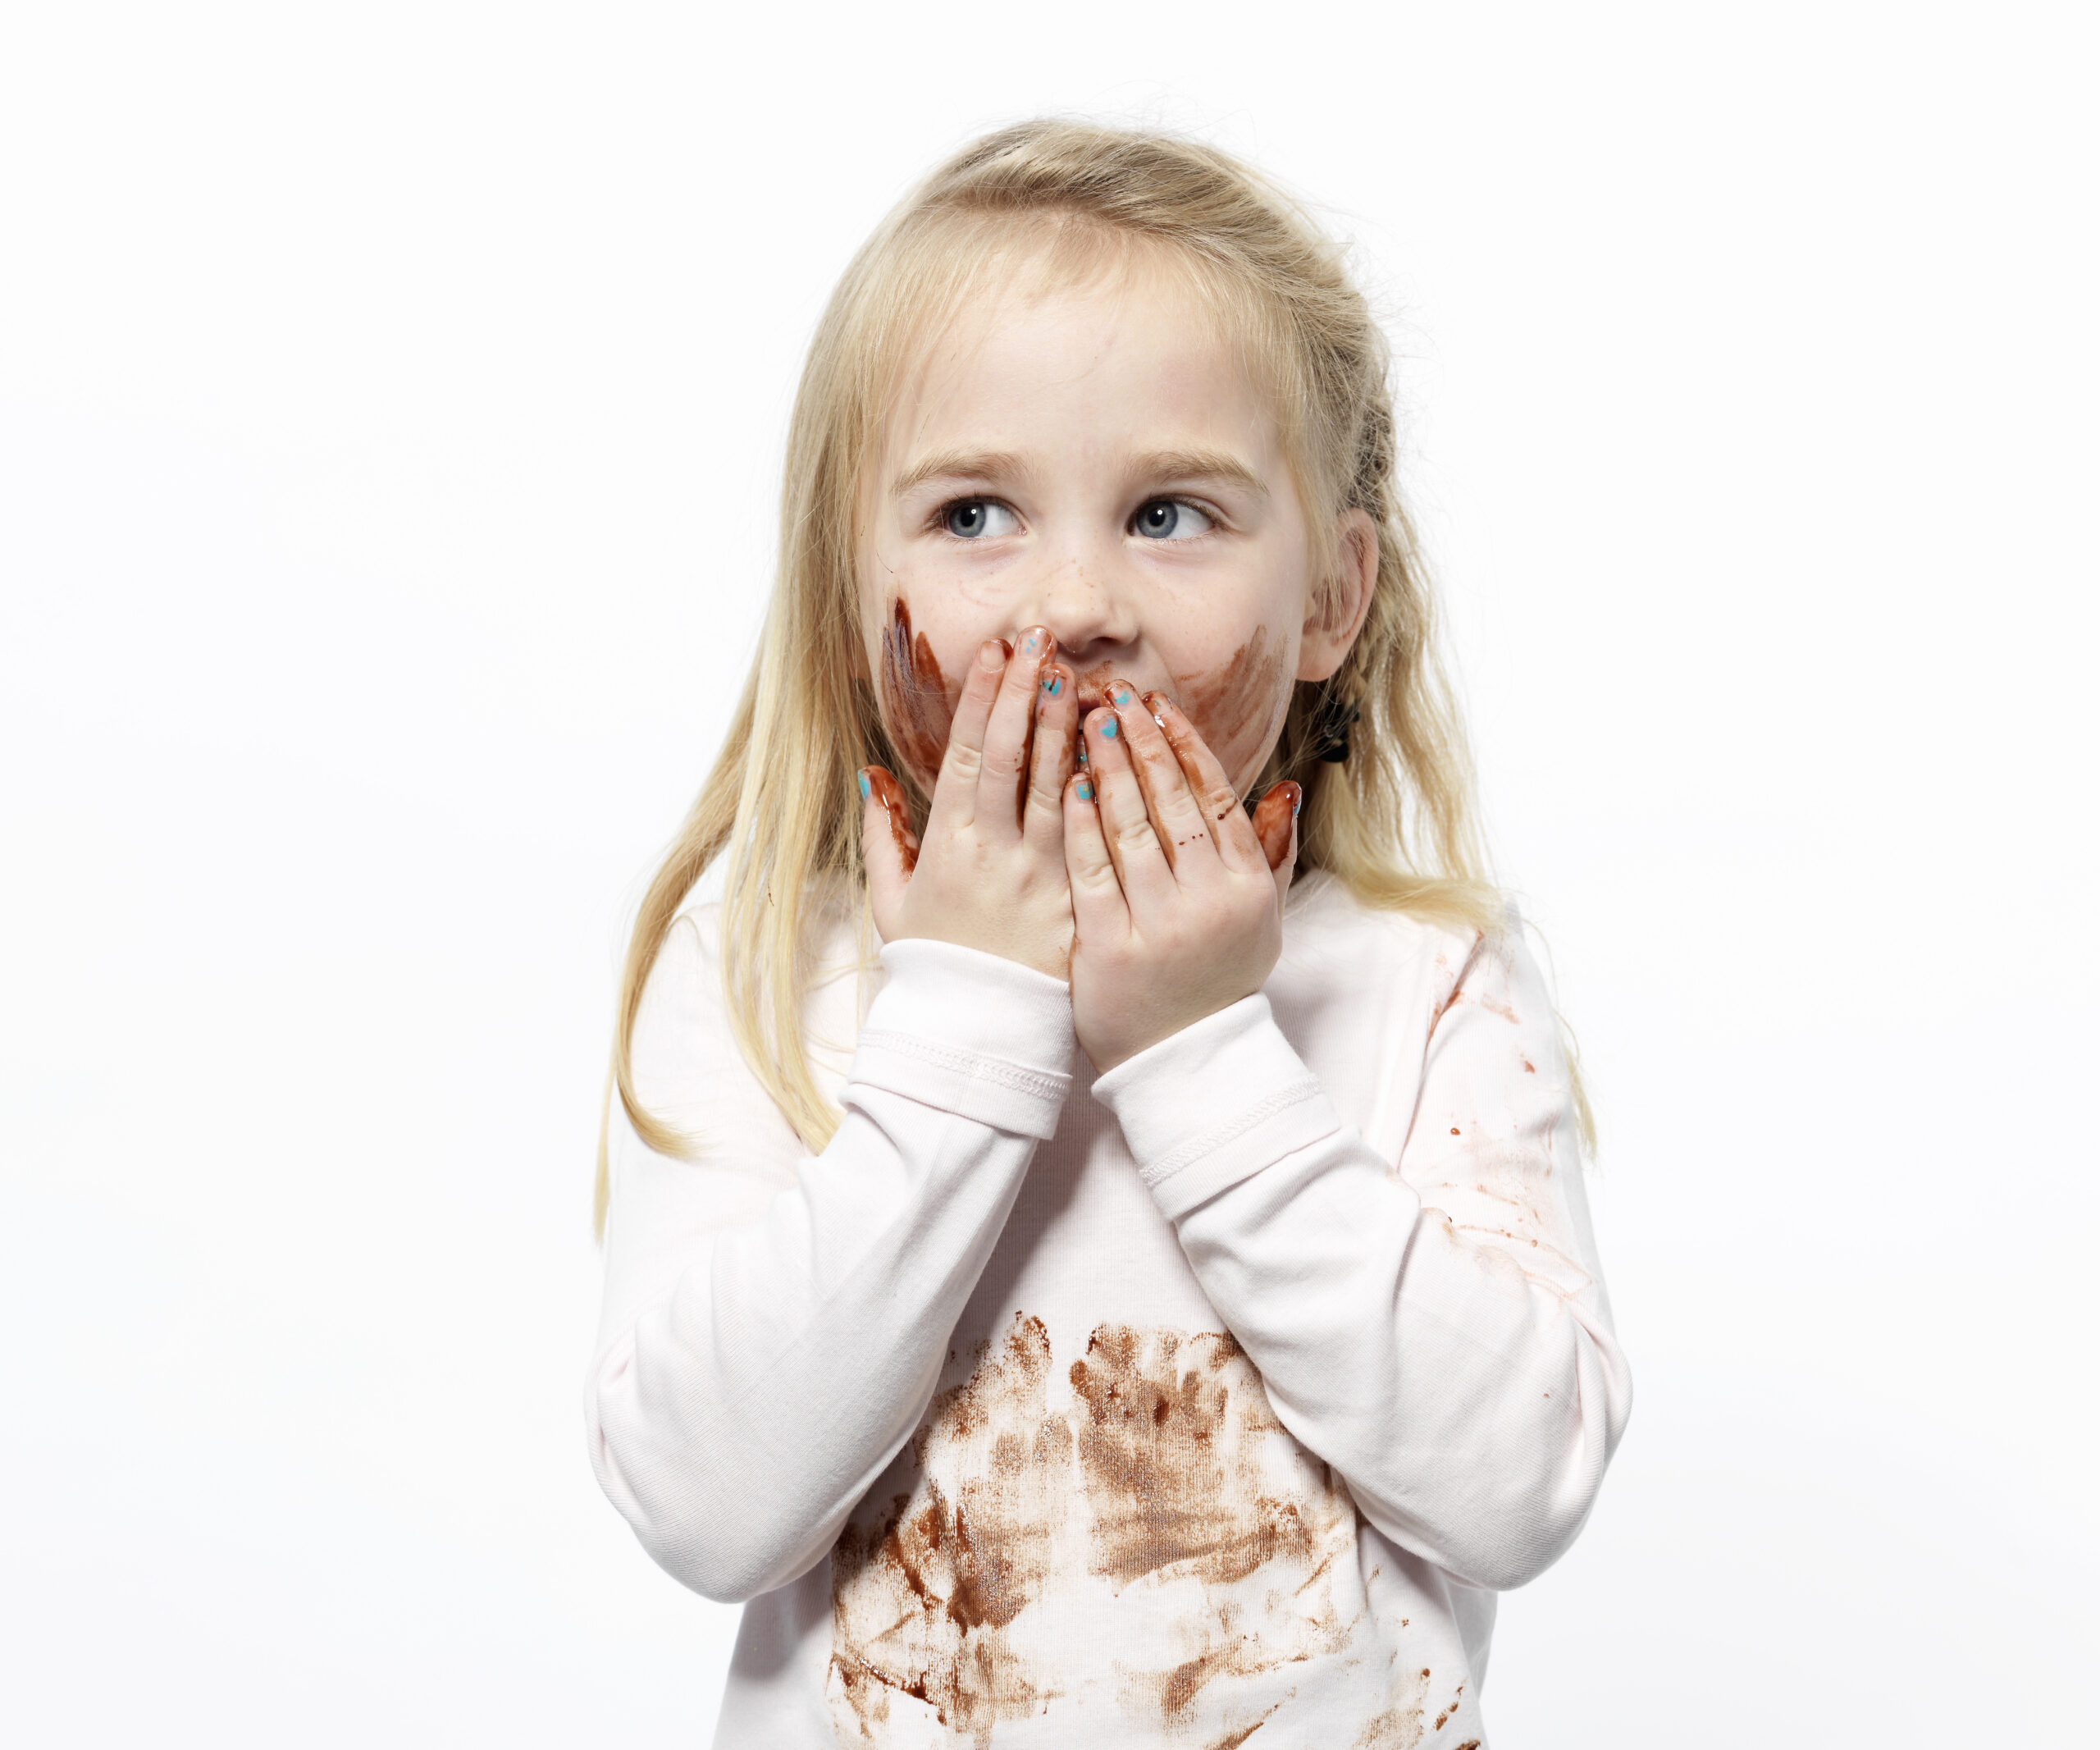 The most embarrassing things kids have said in public